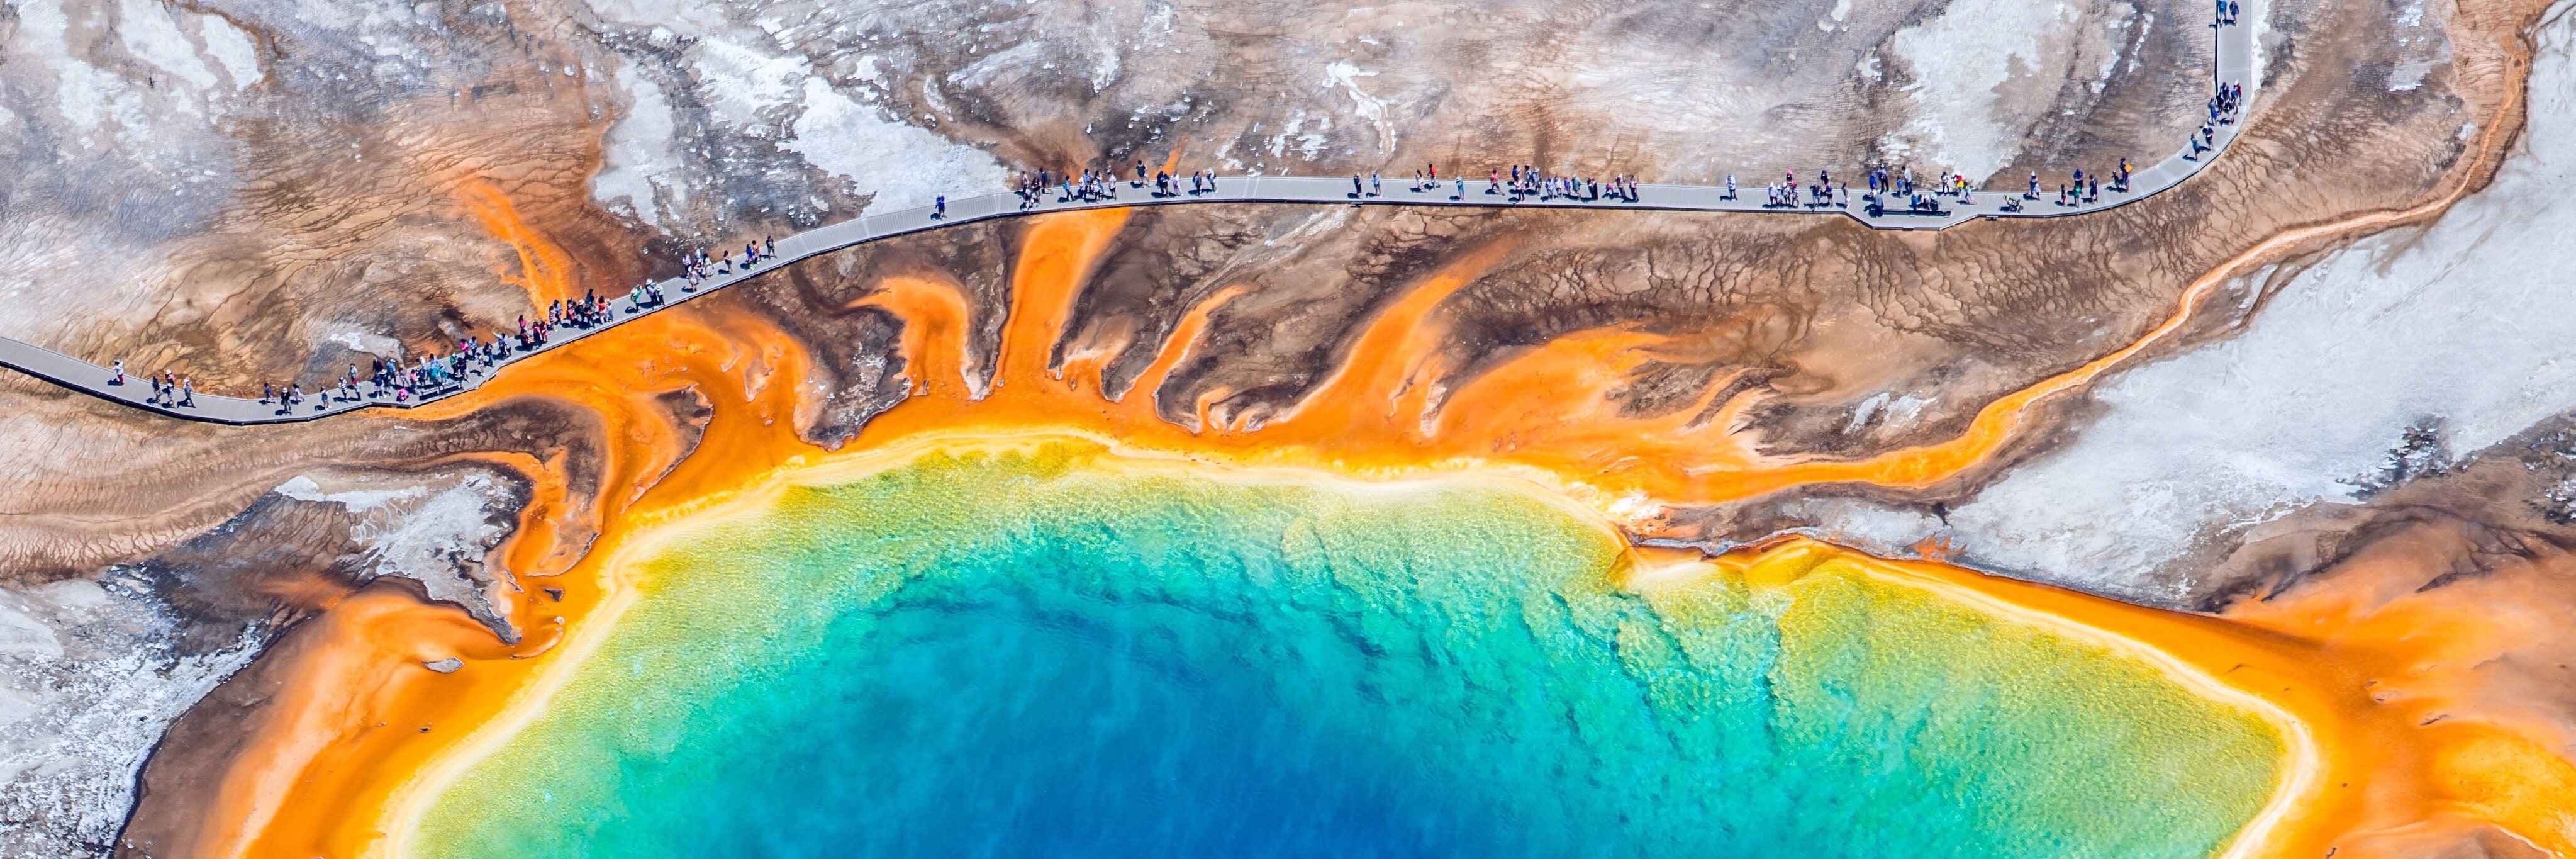 Yellowstone National Park Guide: Everything to Know Before Your Trip. Condé Nast Traveler